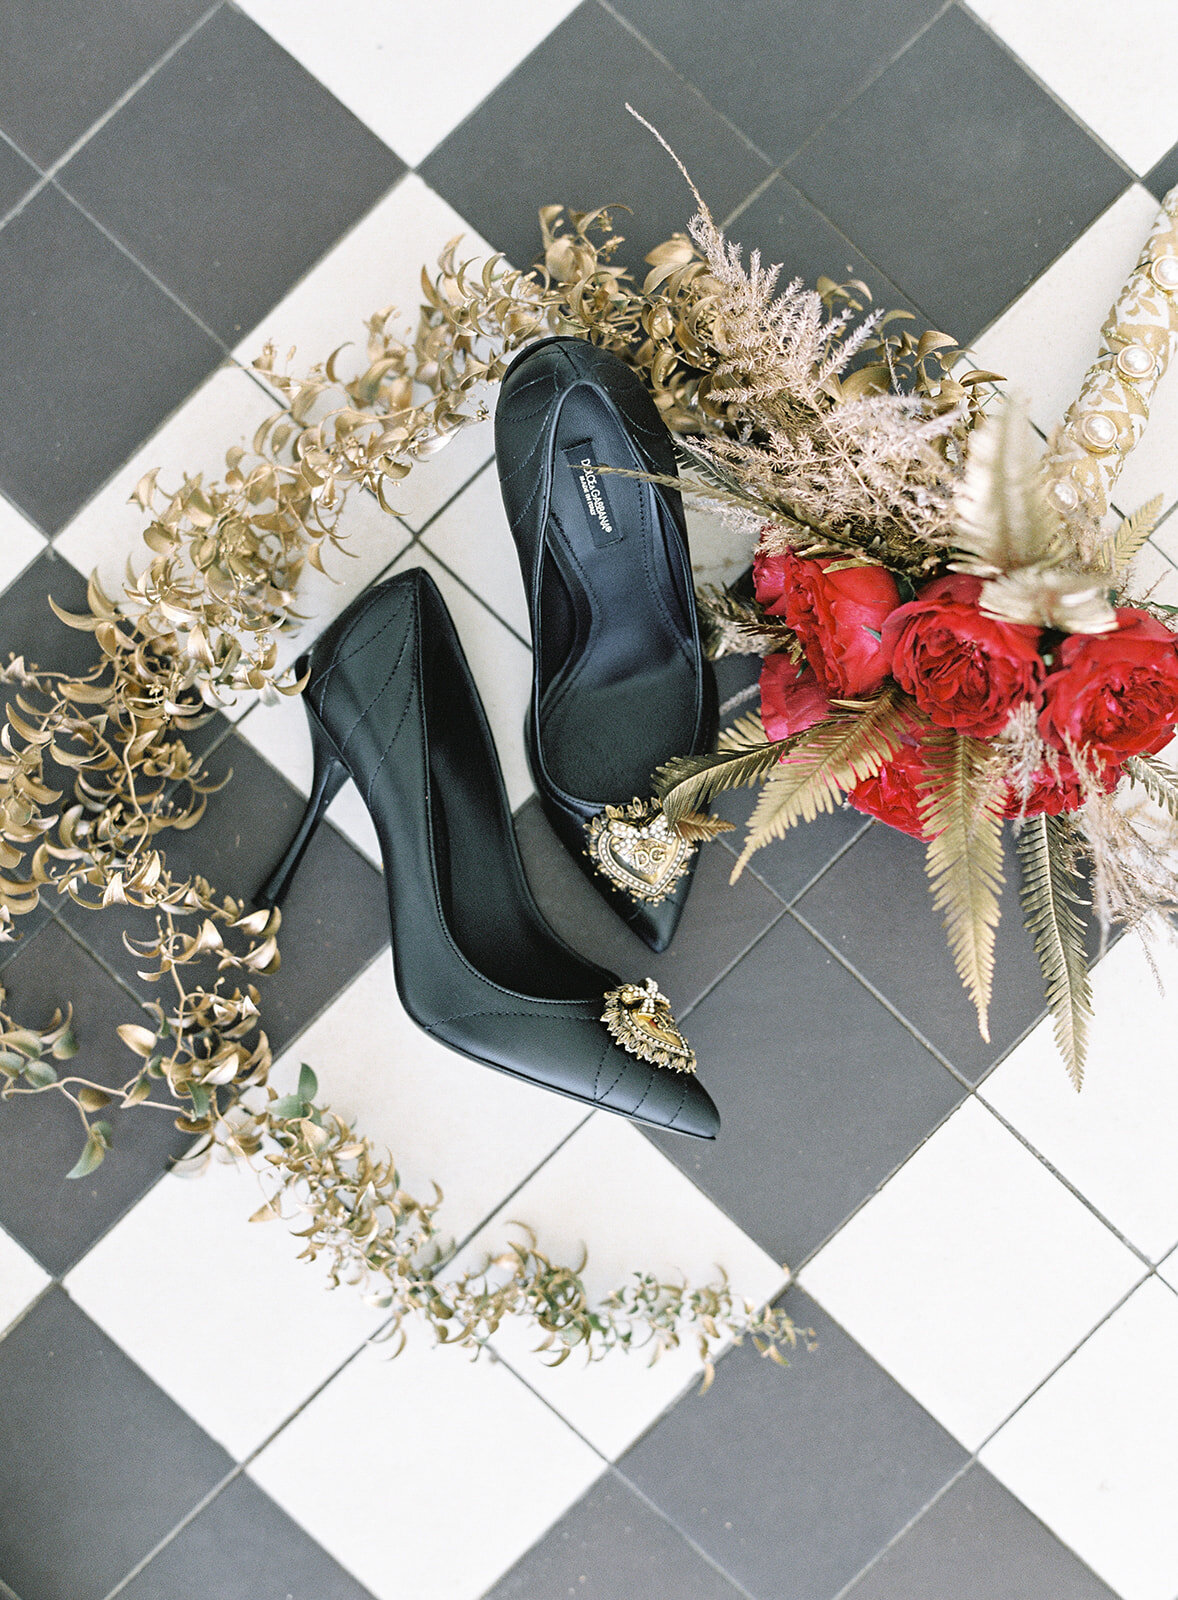 Dolce & Gabbana black bridal shoes with bride's red garden rose and painted gold leaves circling around them. On black and white diamond flooring. Photographed by wedding photographers in Charleston Amy Mulder Photography.